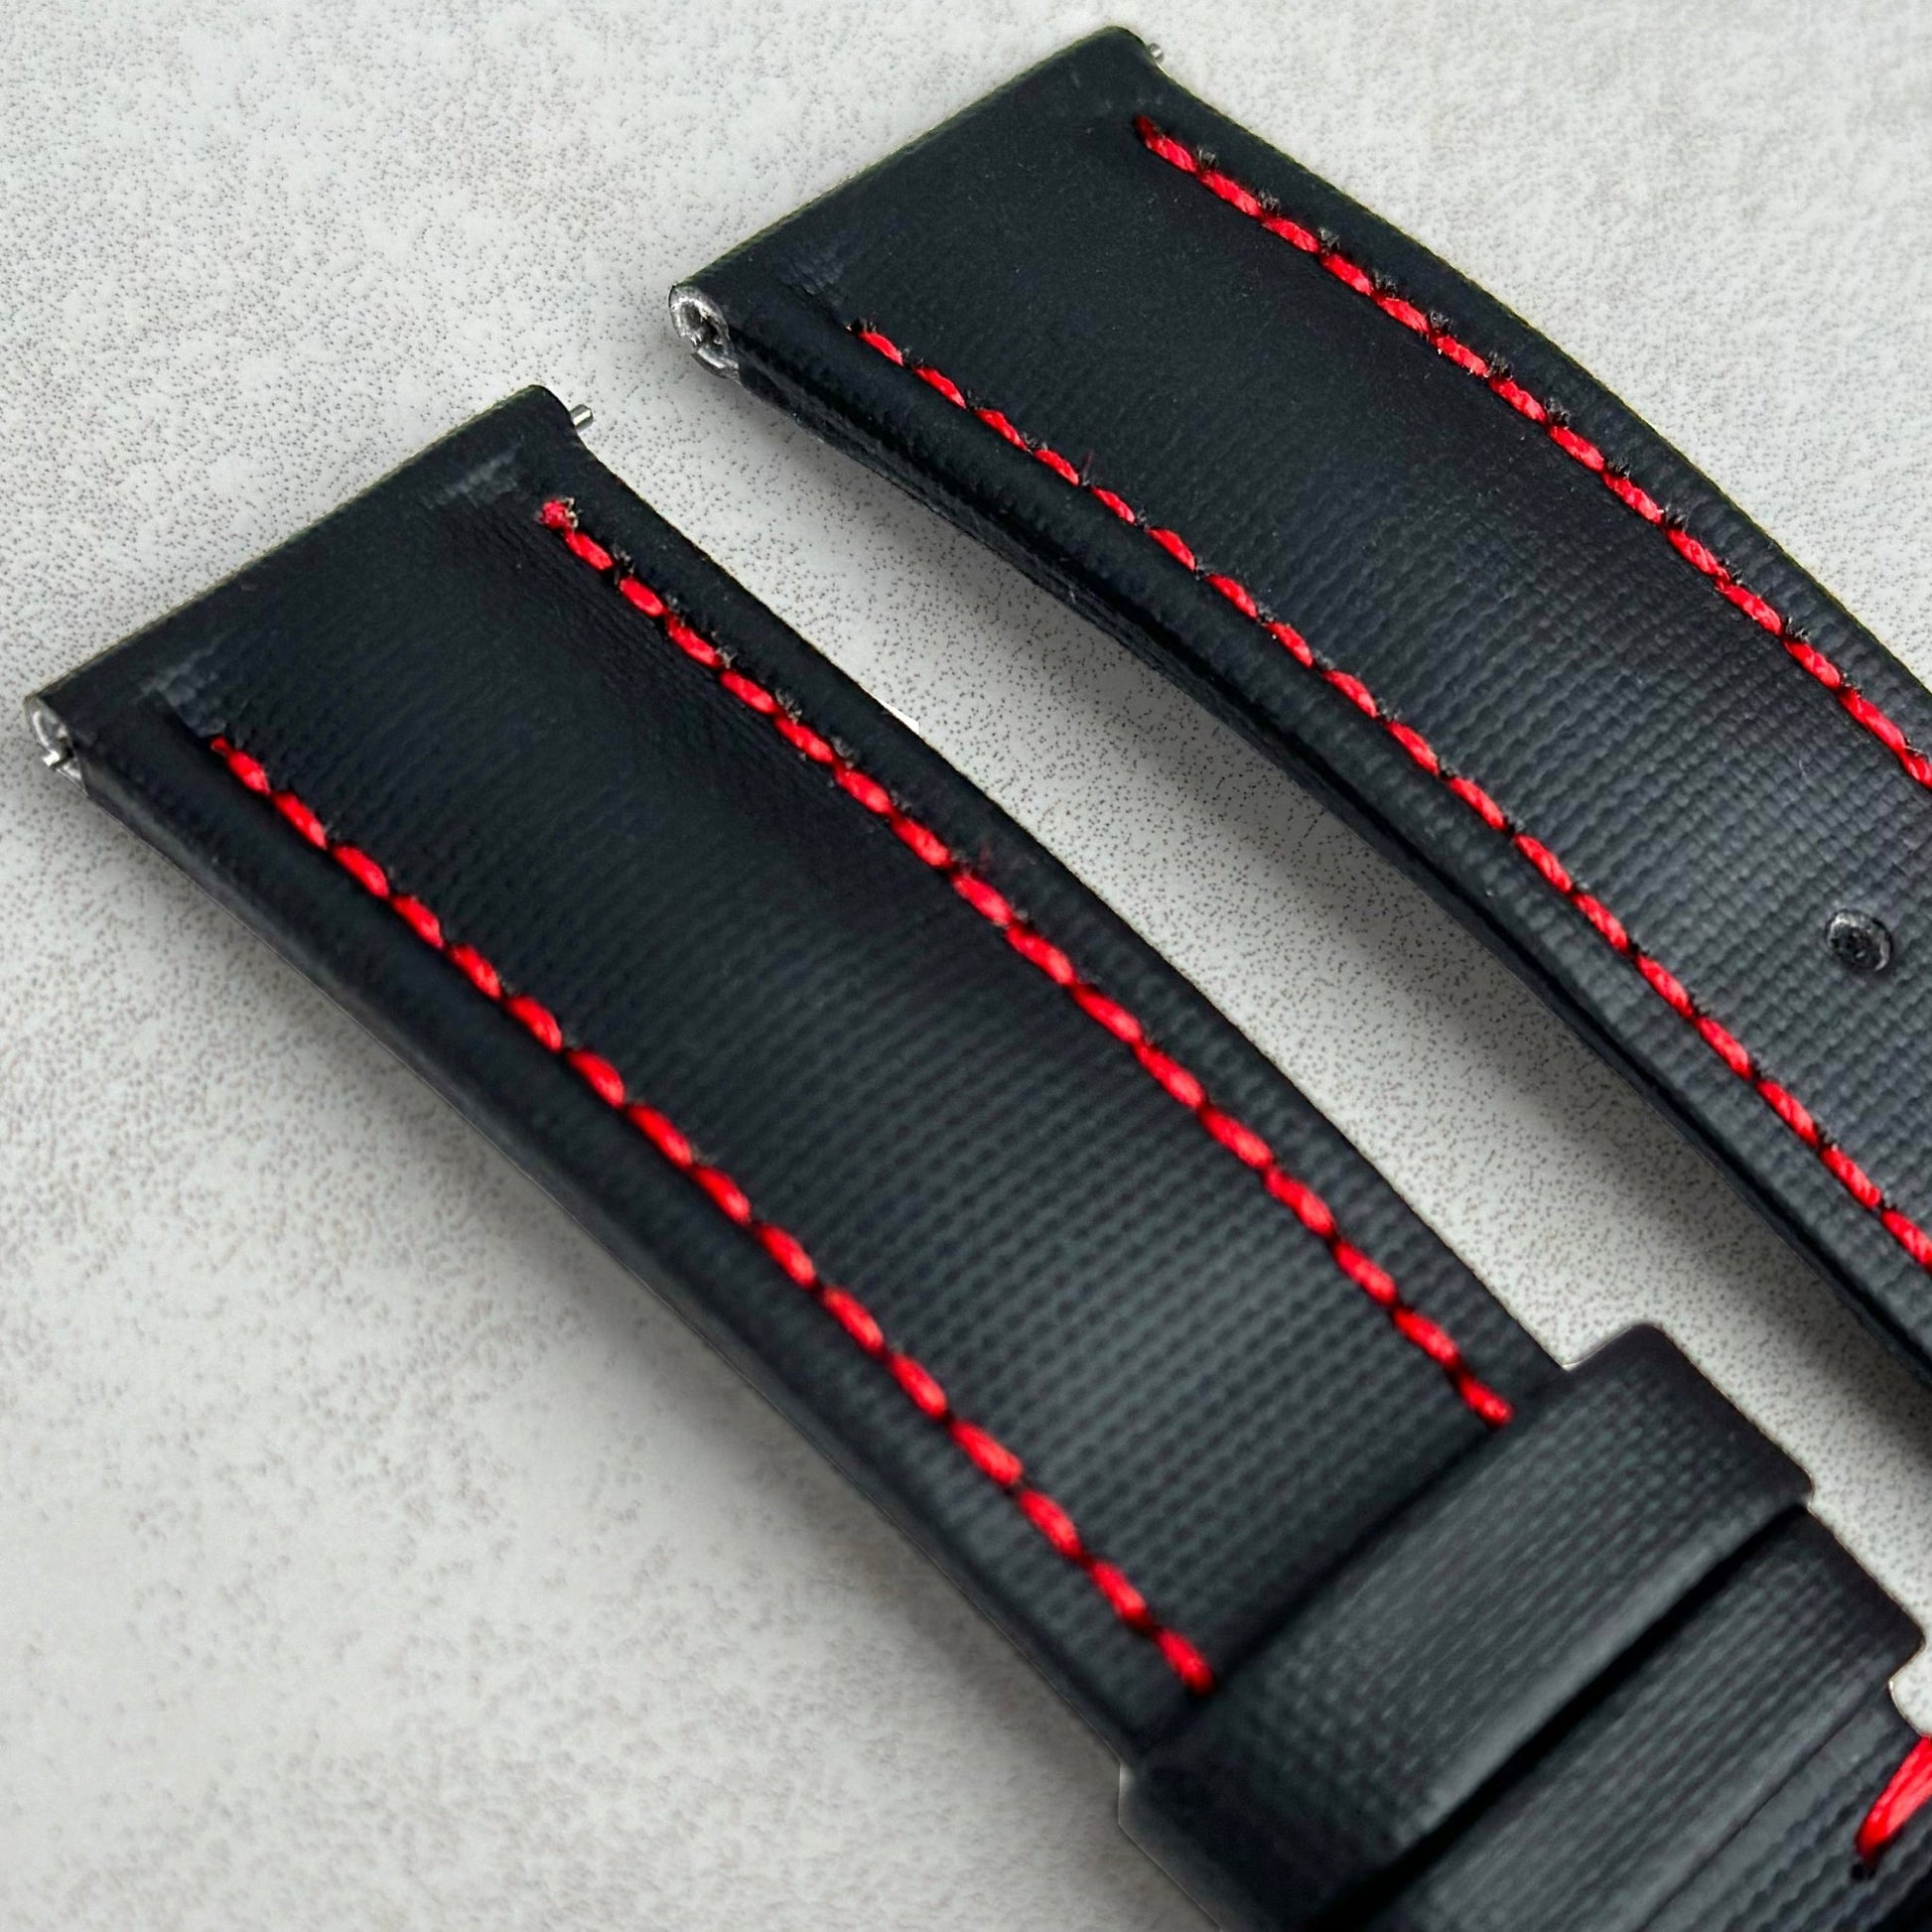 Top of the Bermuda jet black sail cloth watch strap with contrast red stitching. Padded sail cloth strap. Watch And Strap.